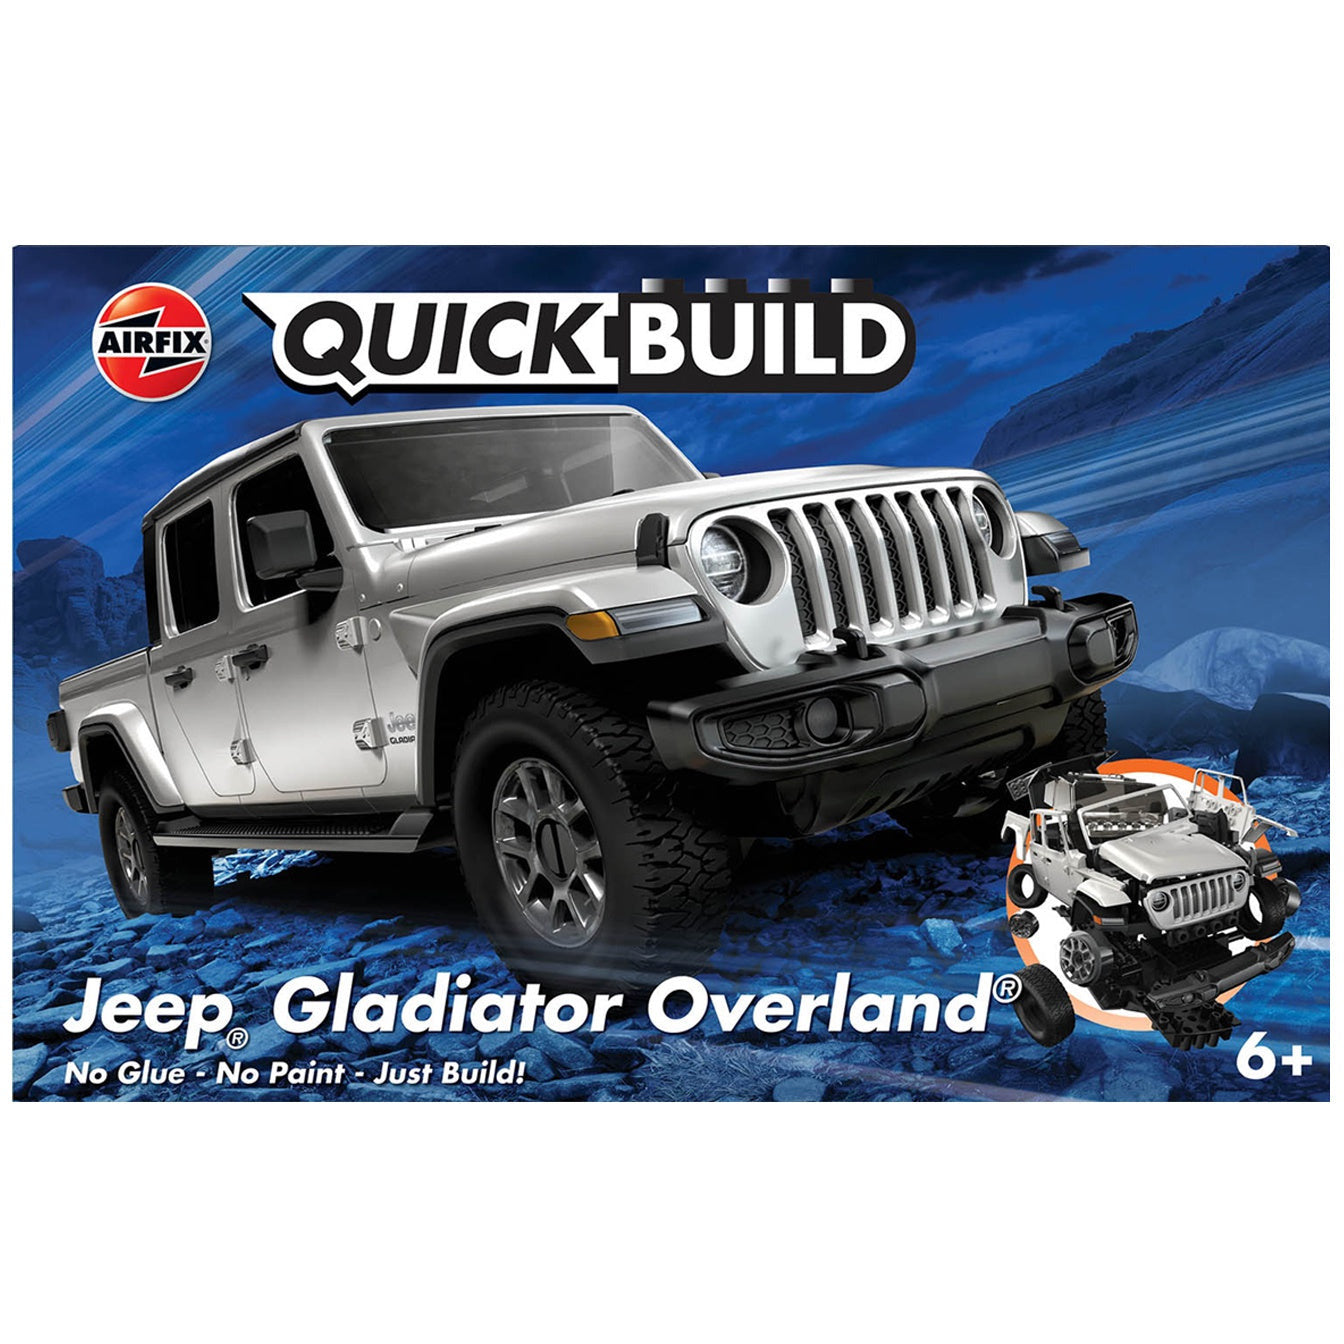 Jeep Gladiator (JT) Overland 1/24 Quick Build Car Kit #J6039 by Airfix